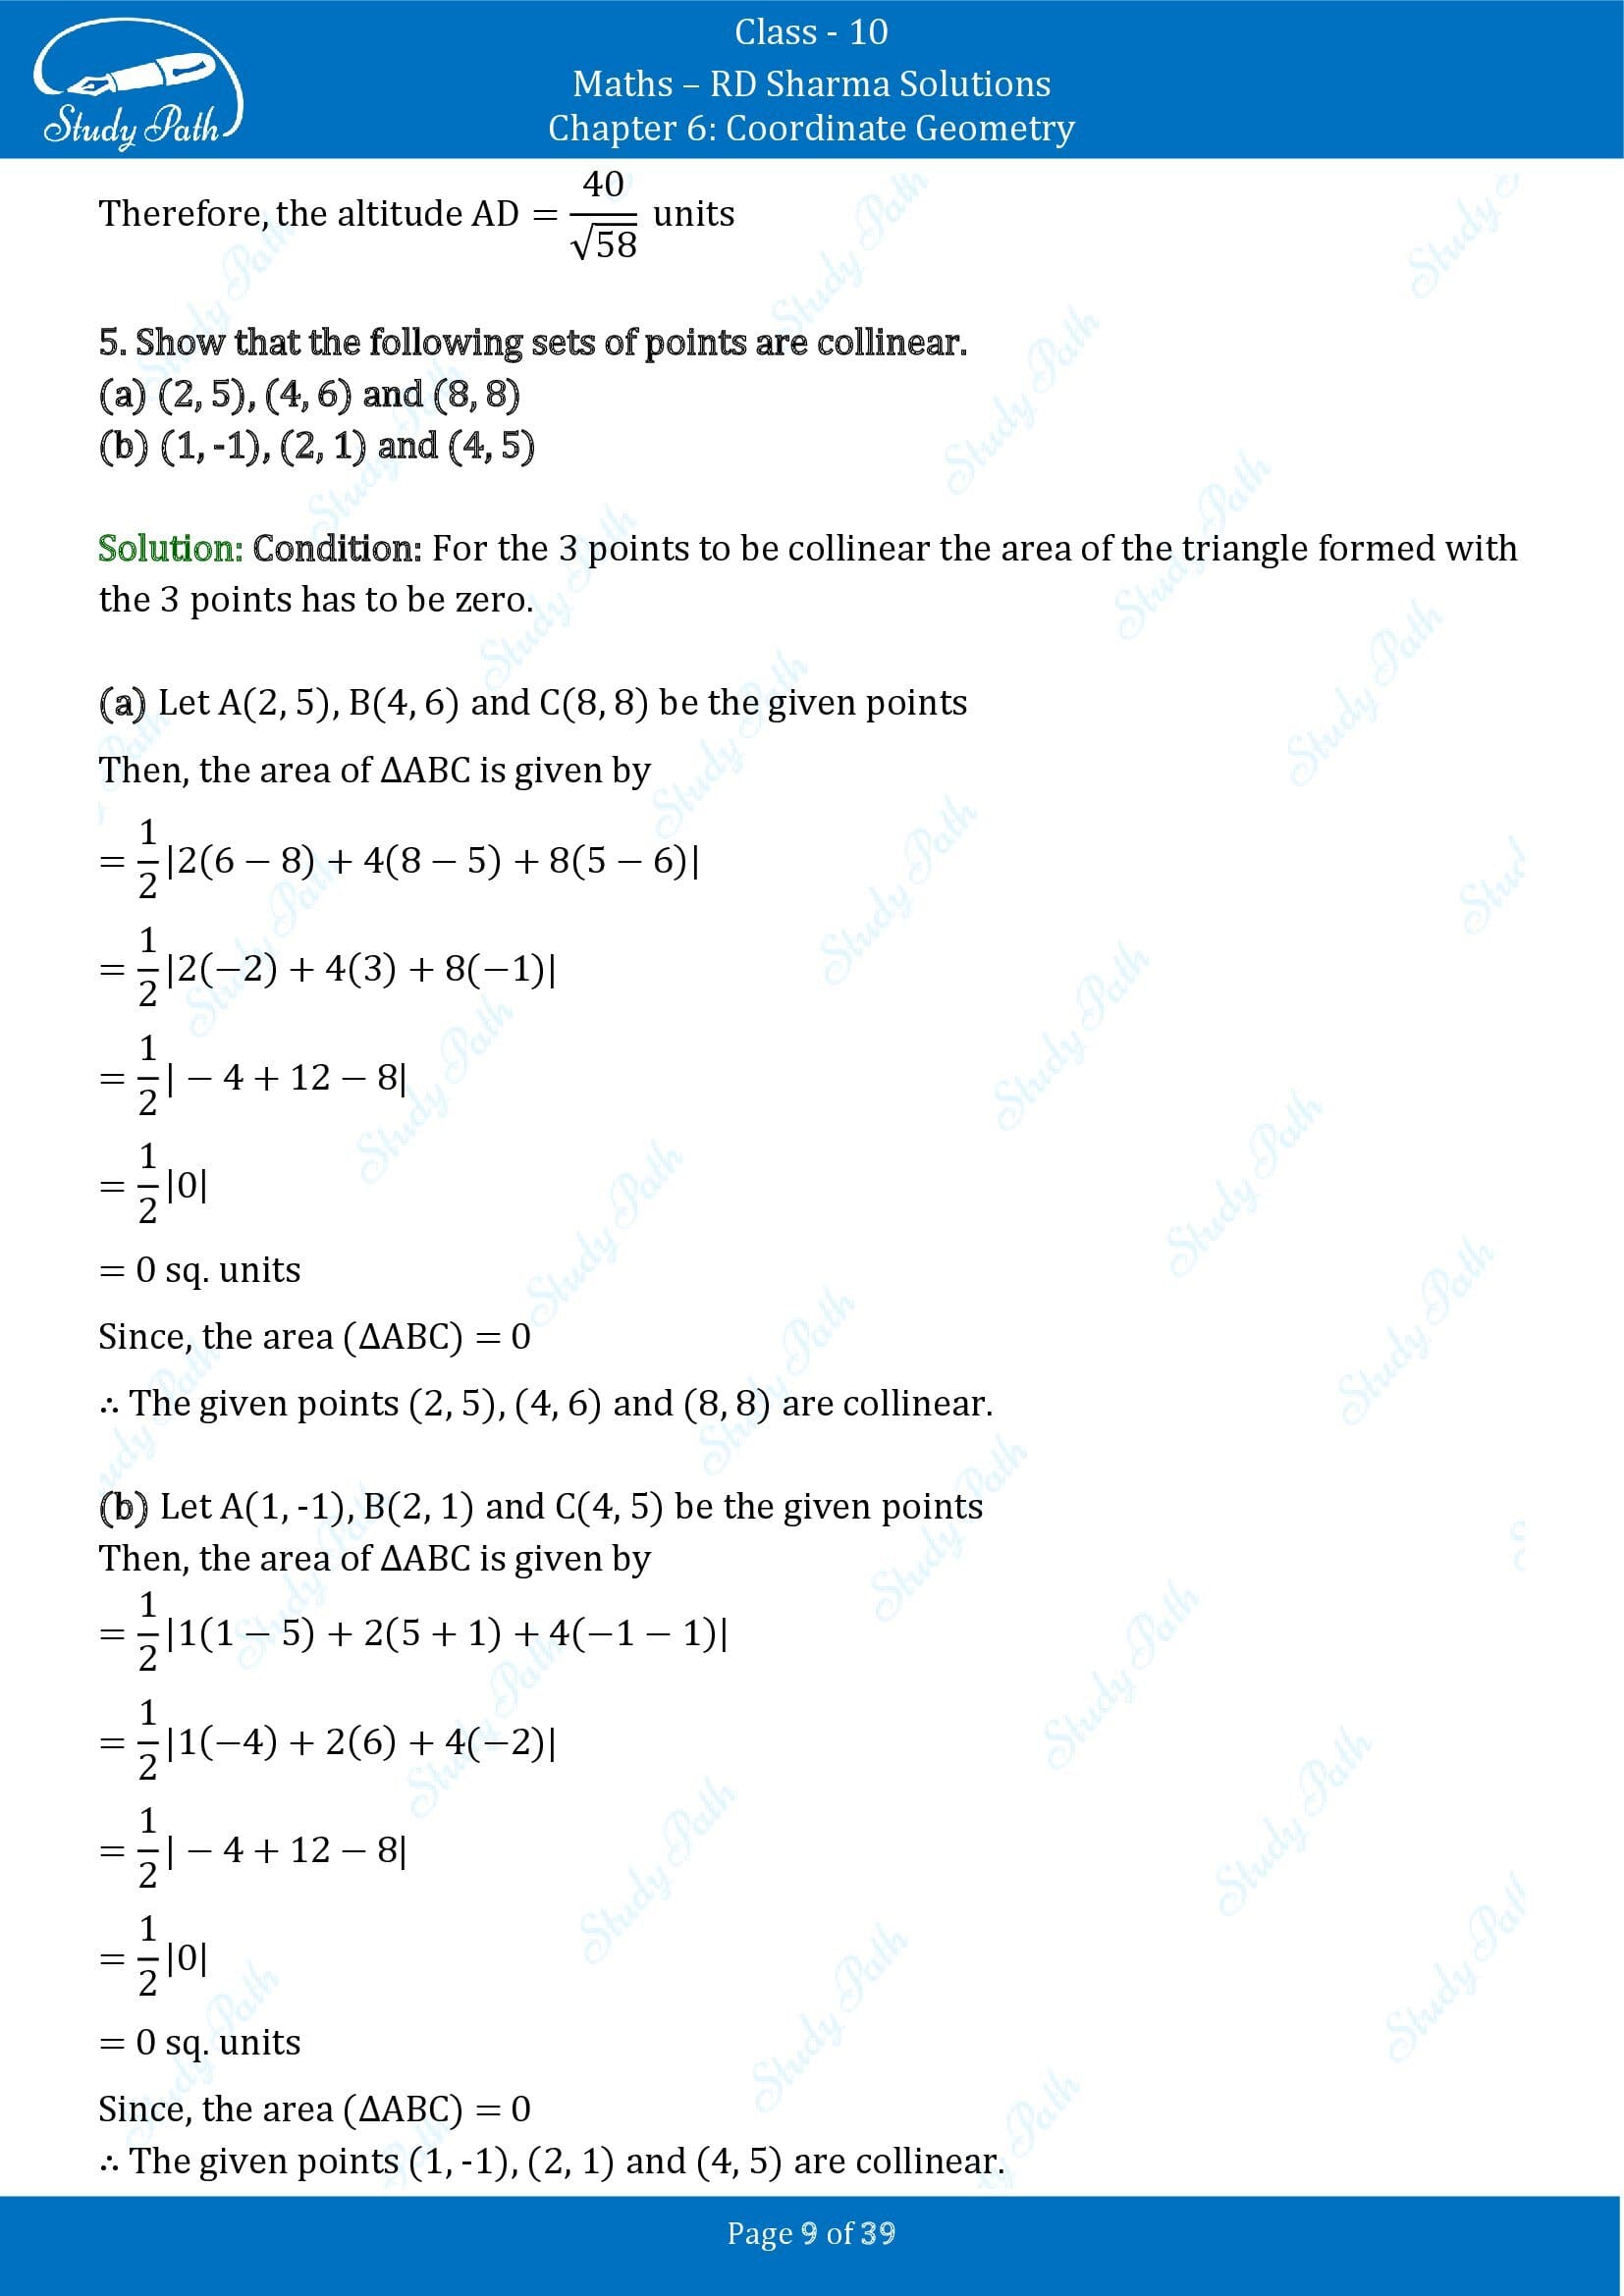 RD Sharma Solutions Class 10 Chapter 6 Coordinate Geometry Exercise 6.5 0009